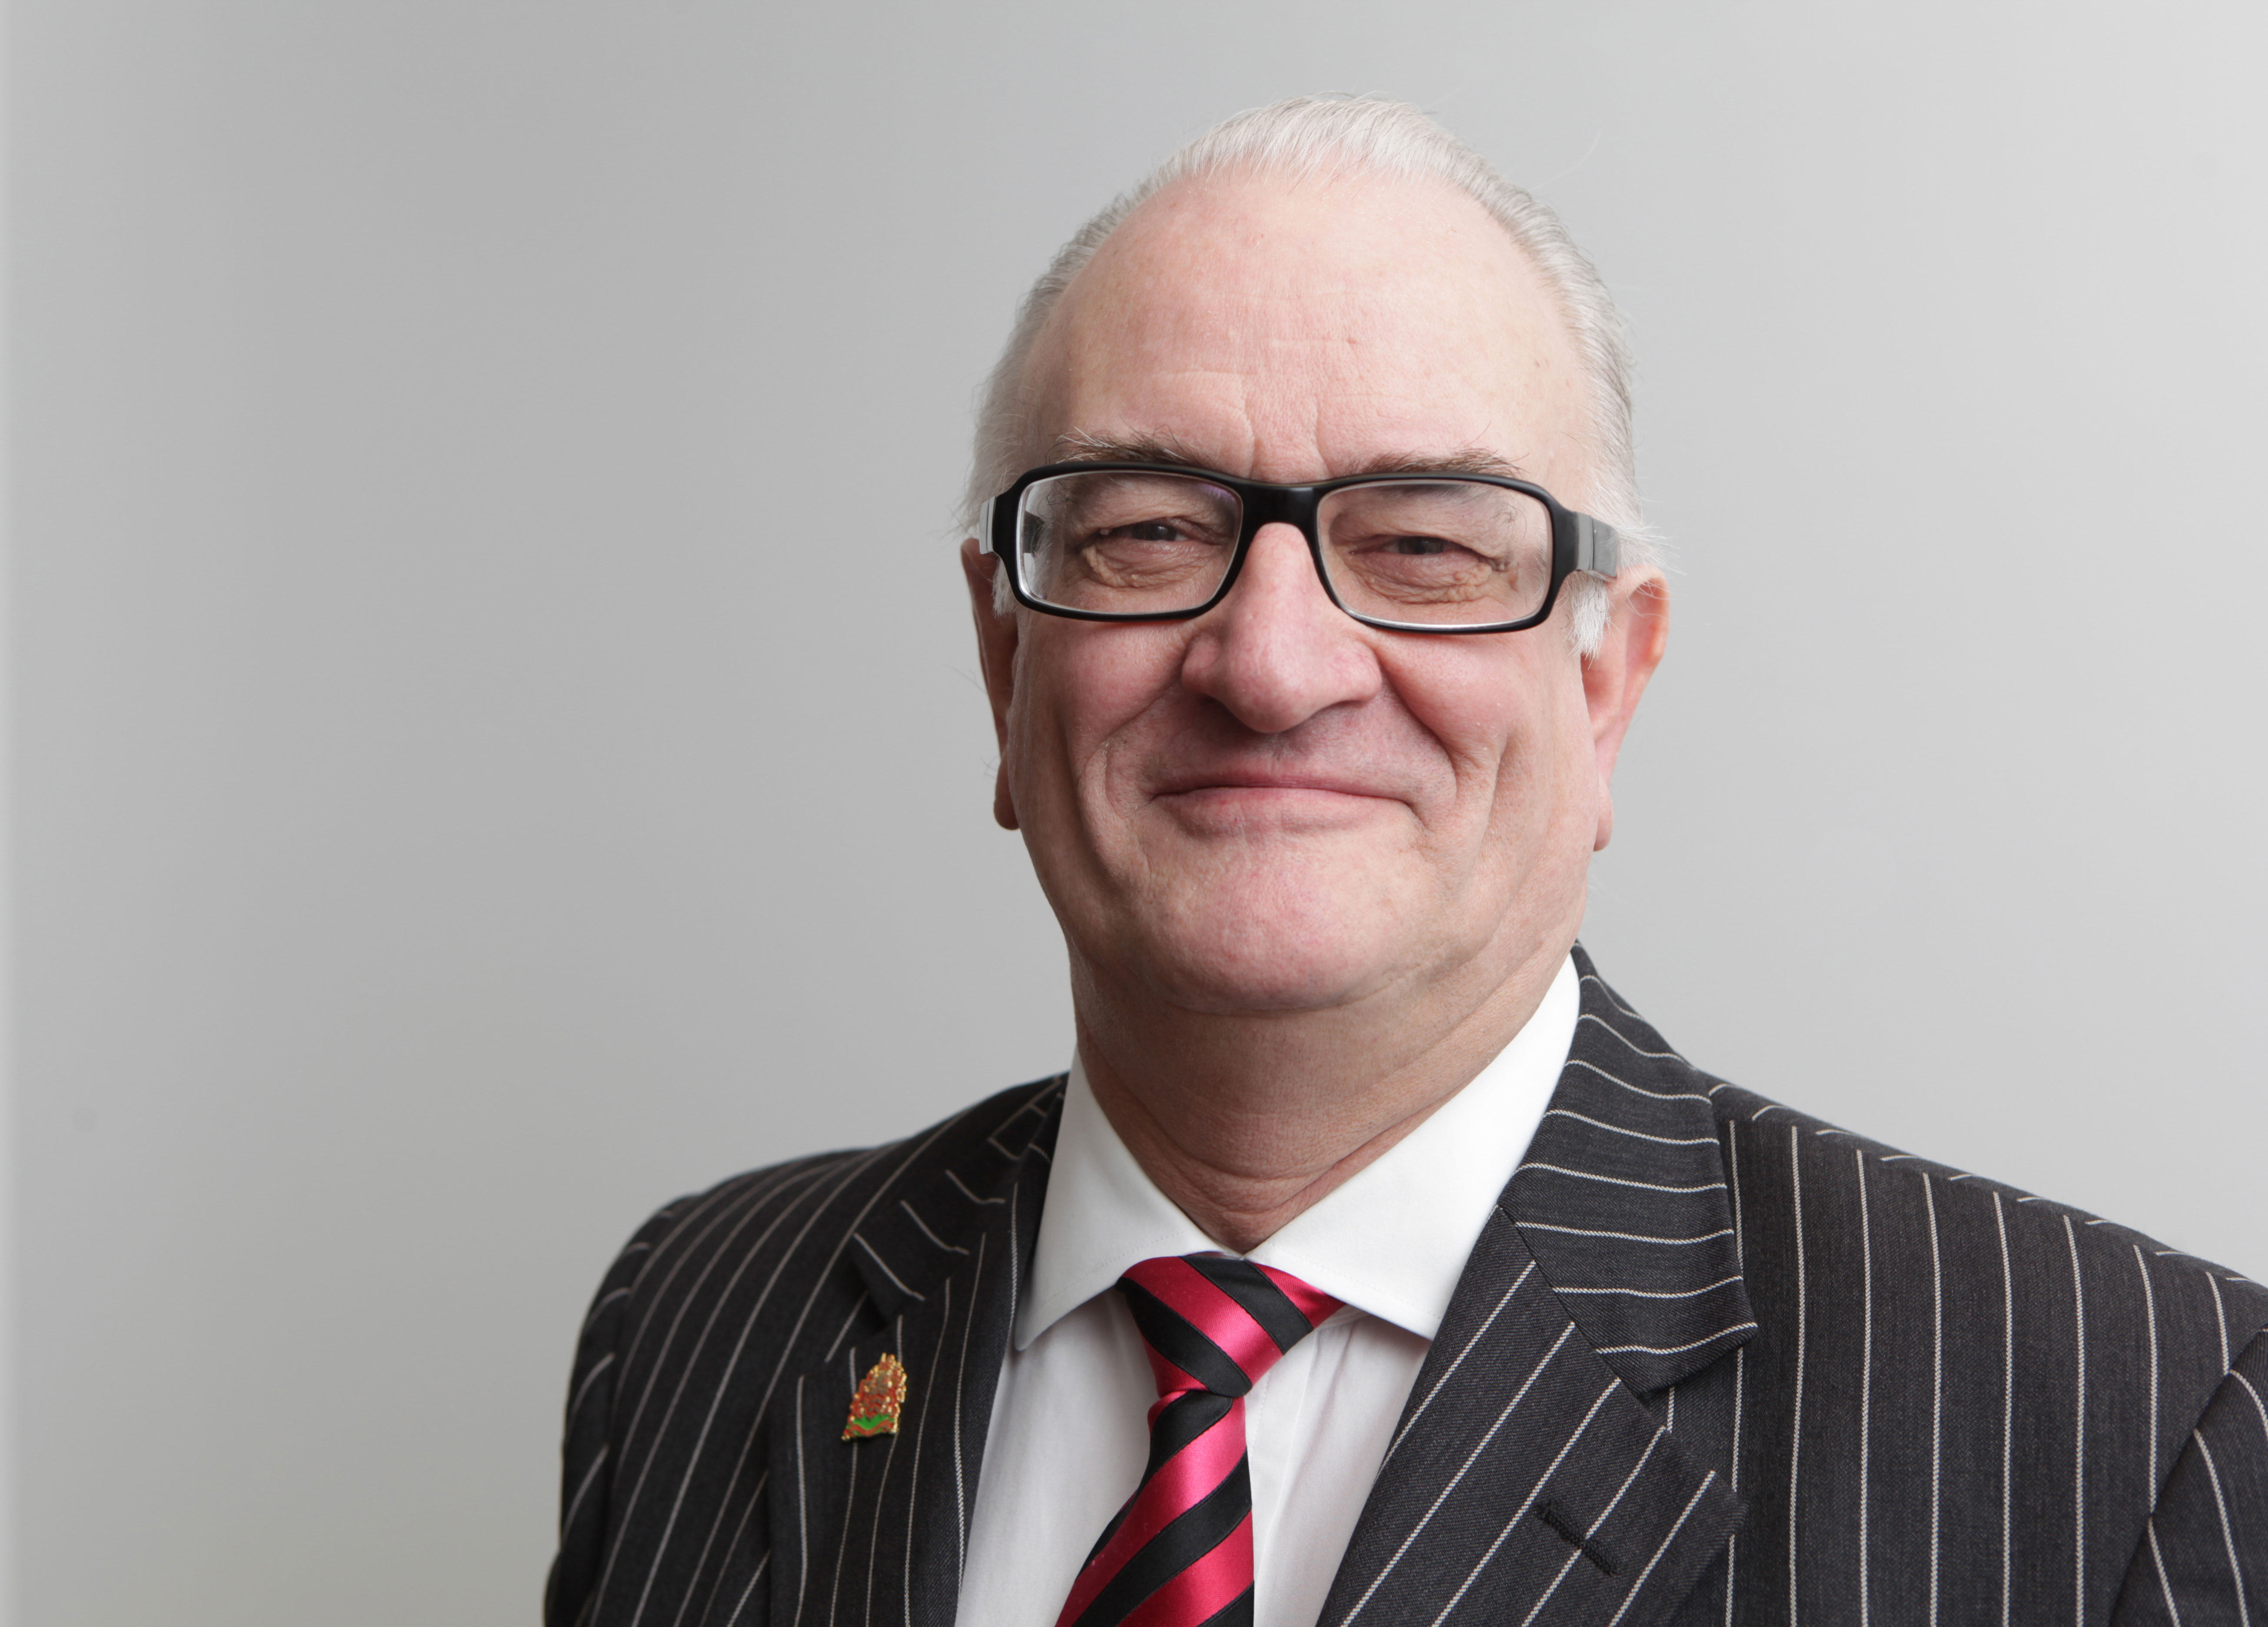 GFirst LEP appoints Ian Mean to Board of Directors